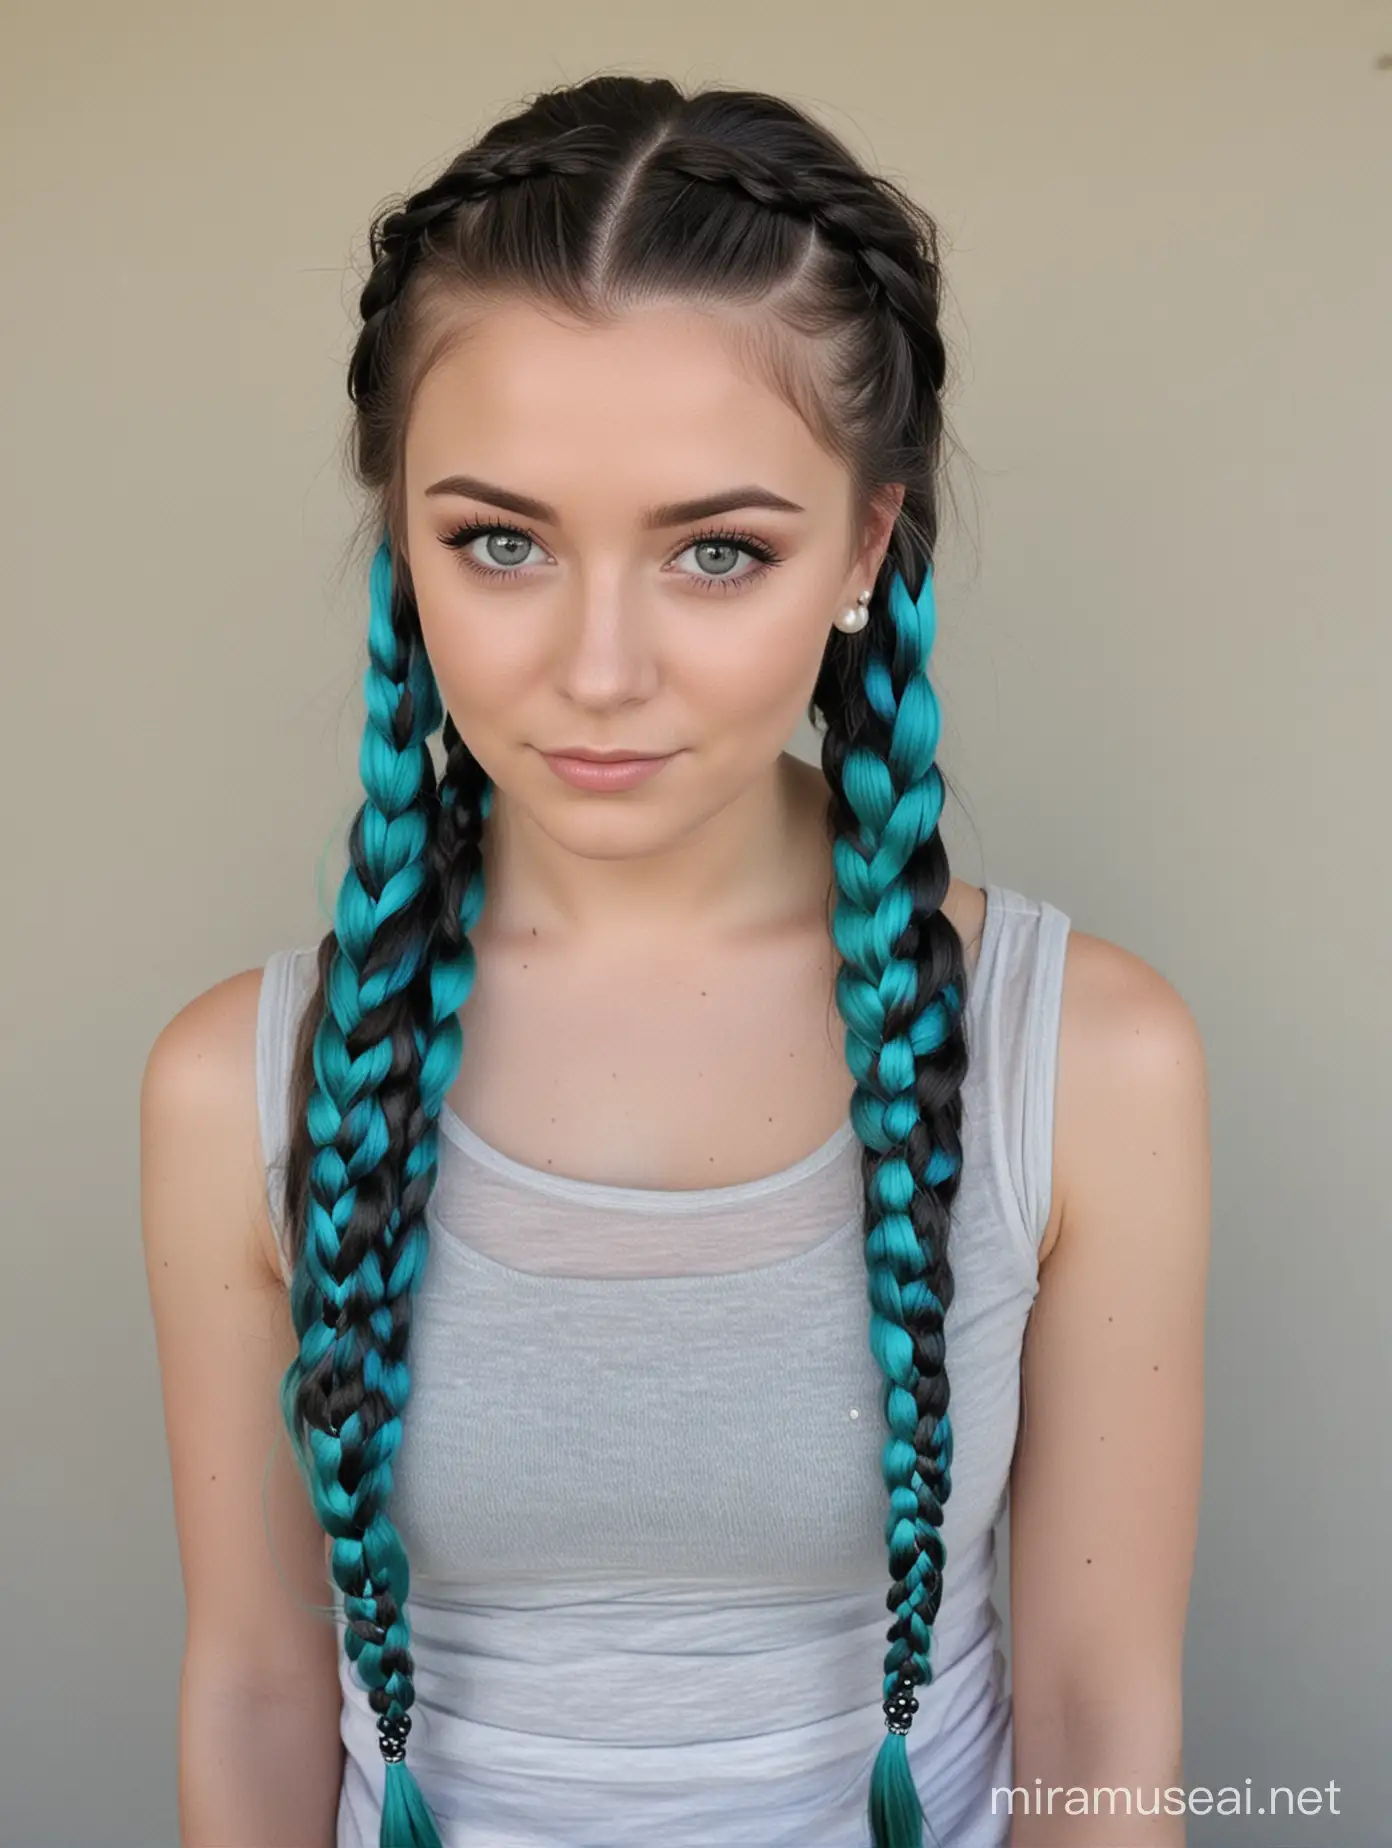 Elegant Braided Hairstyle with Black Blue and Green Tones Accented by Pearls